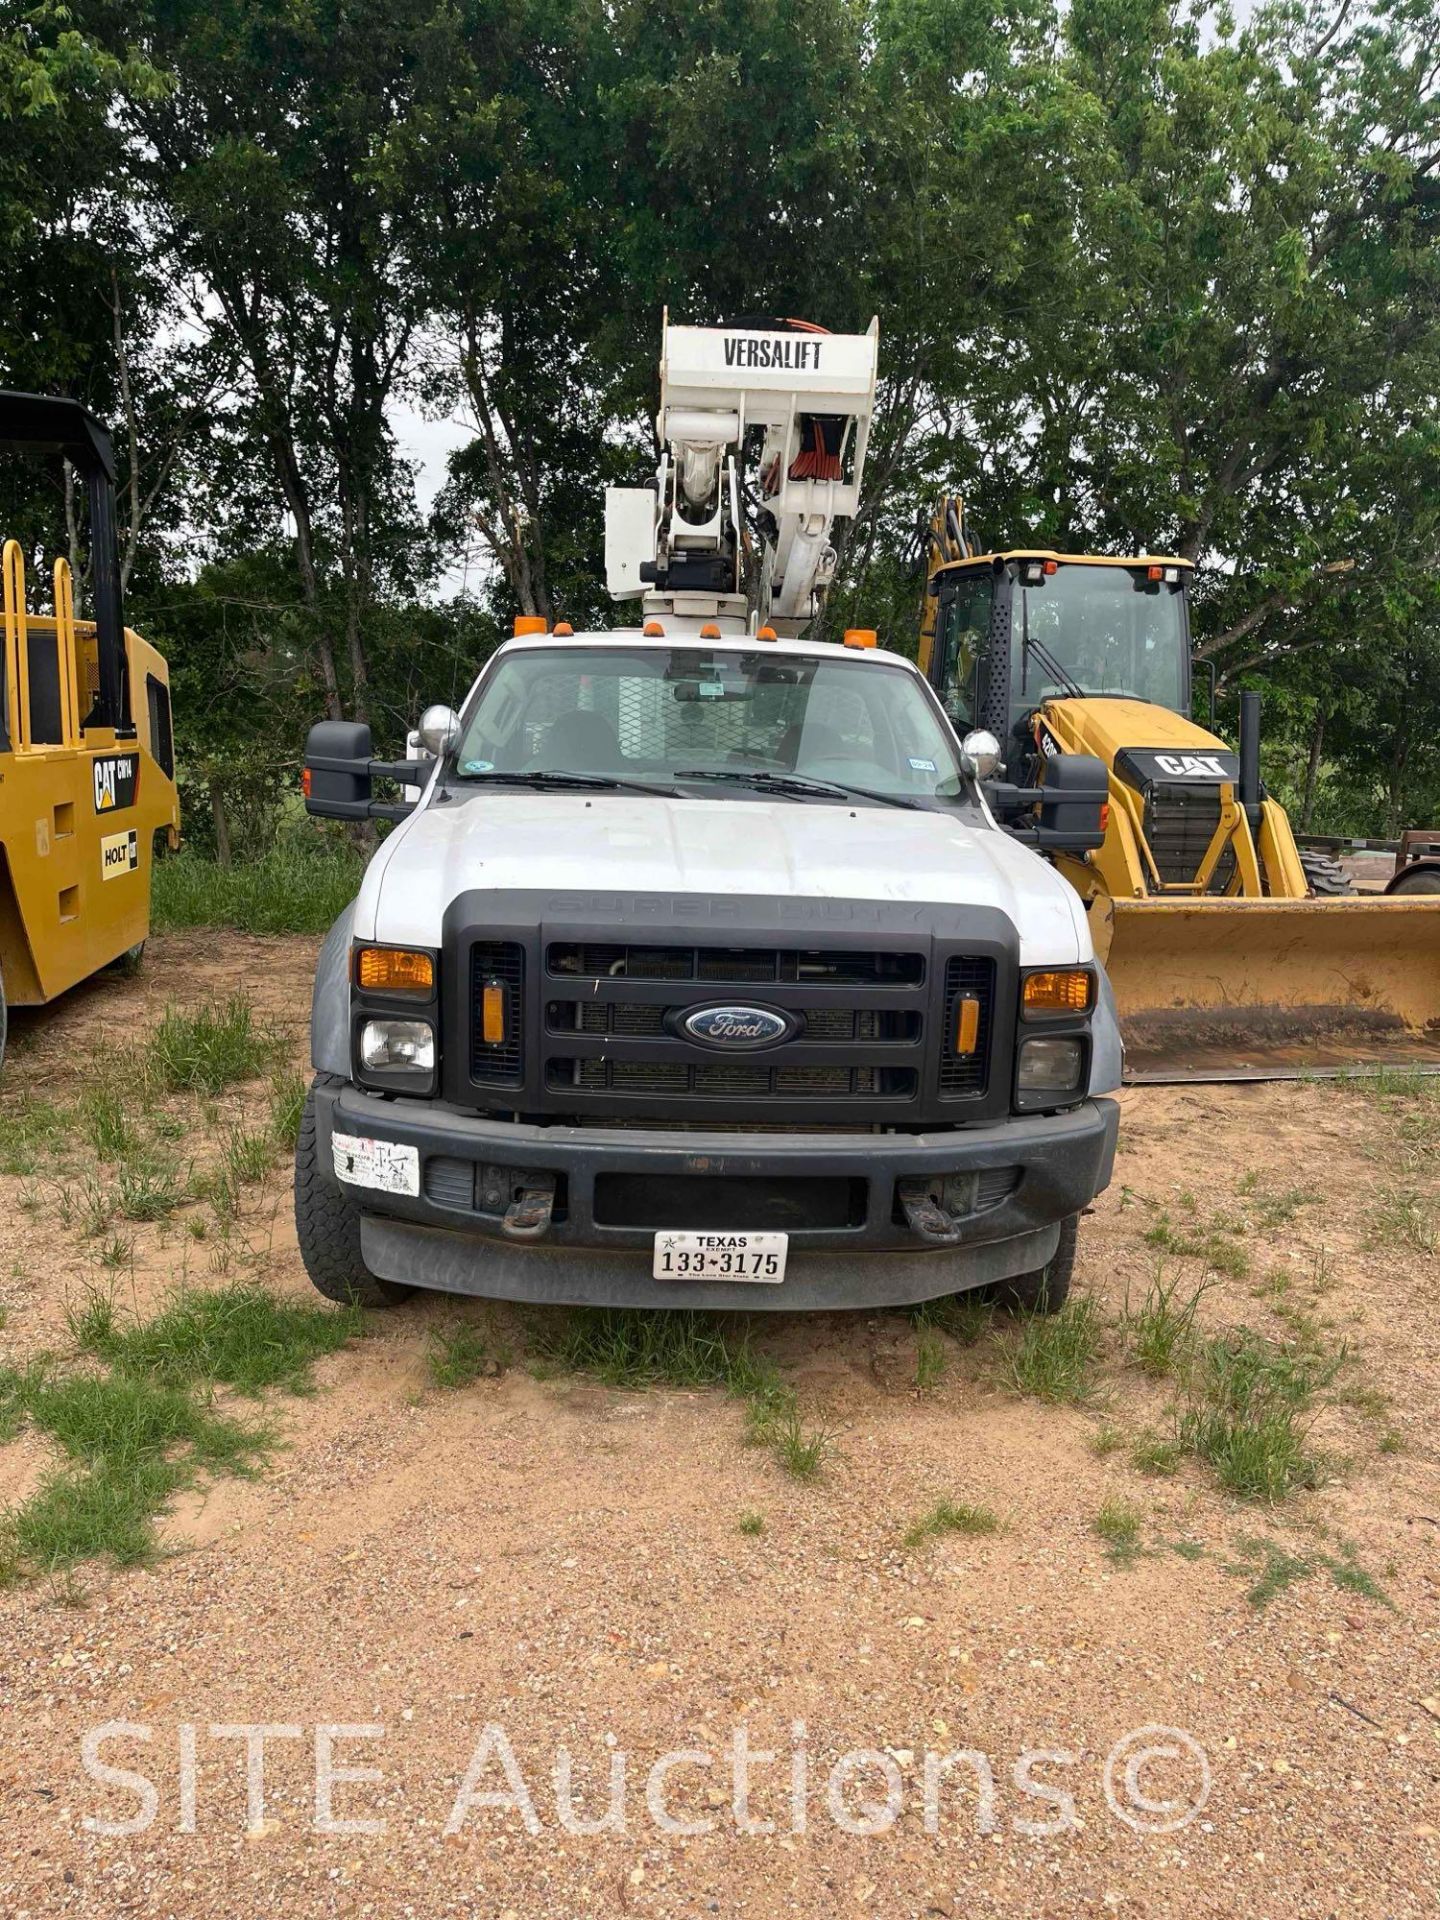 2009 Ford F550 SD Bucket Truck - Image 4 of 30